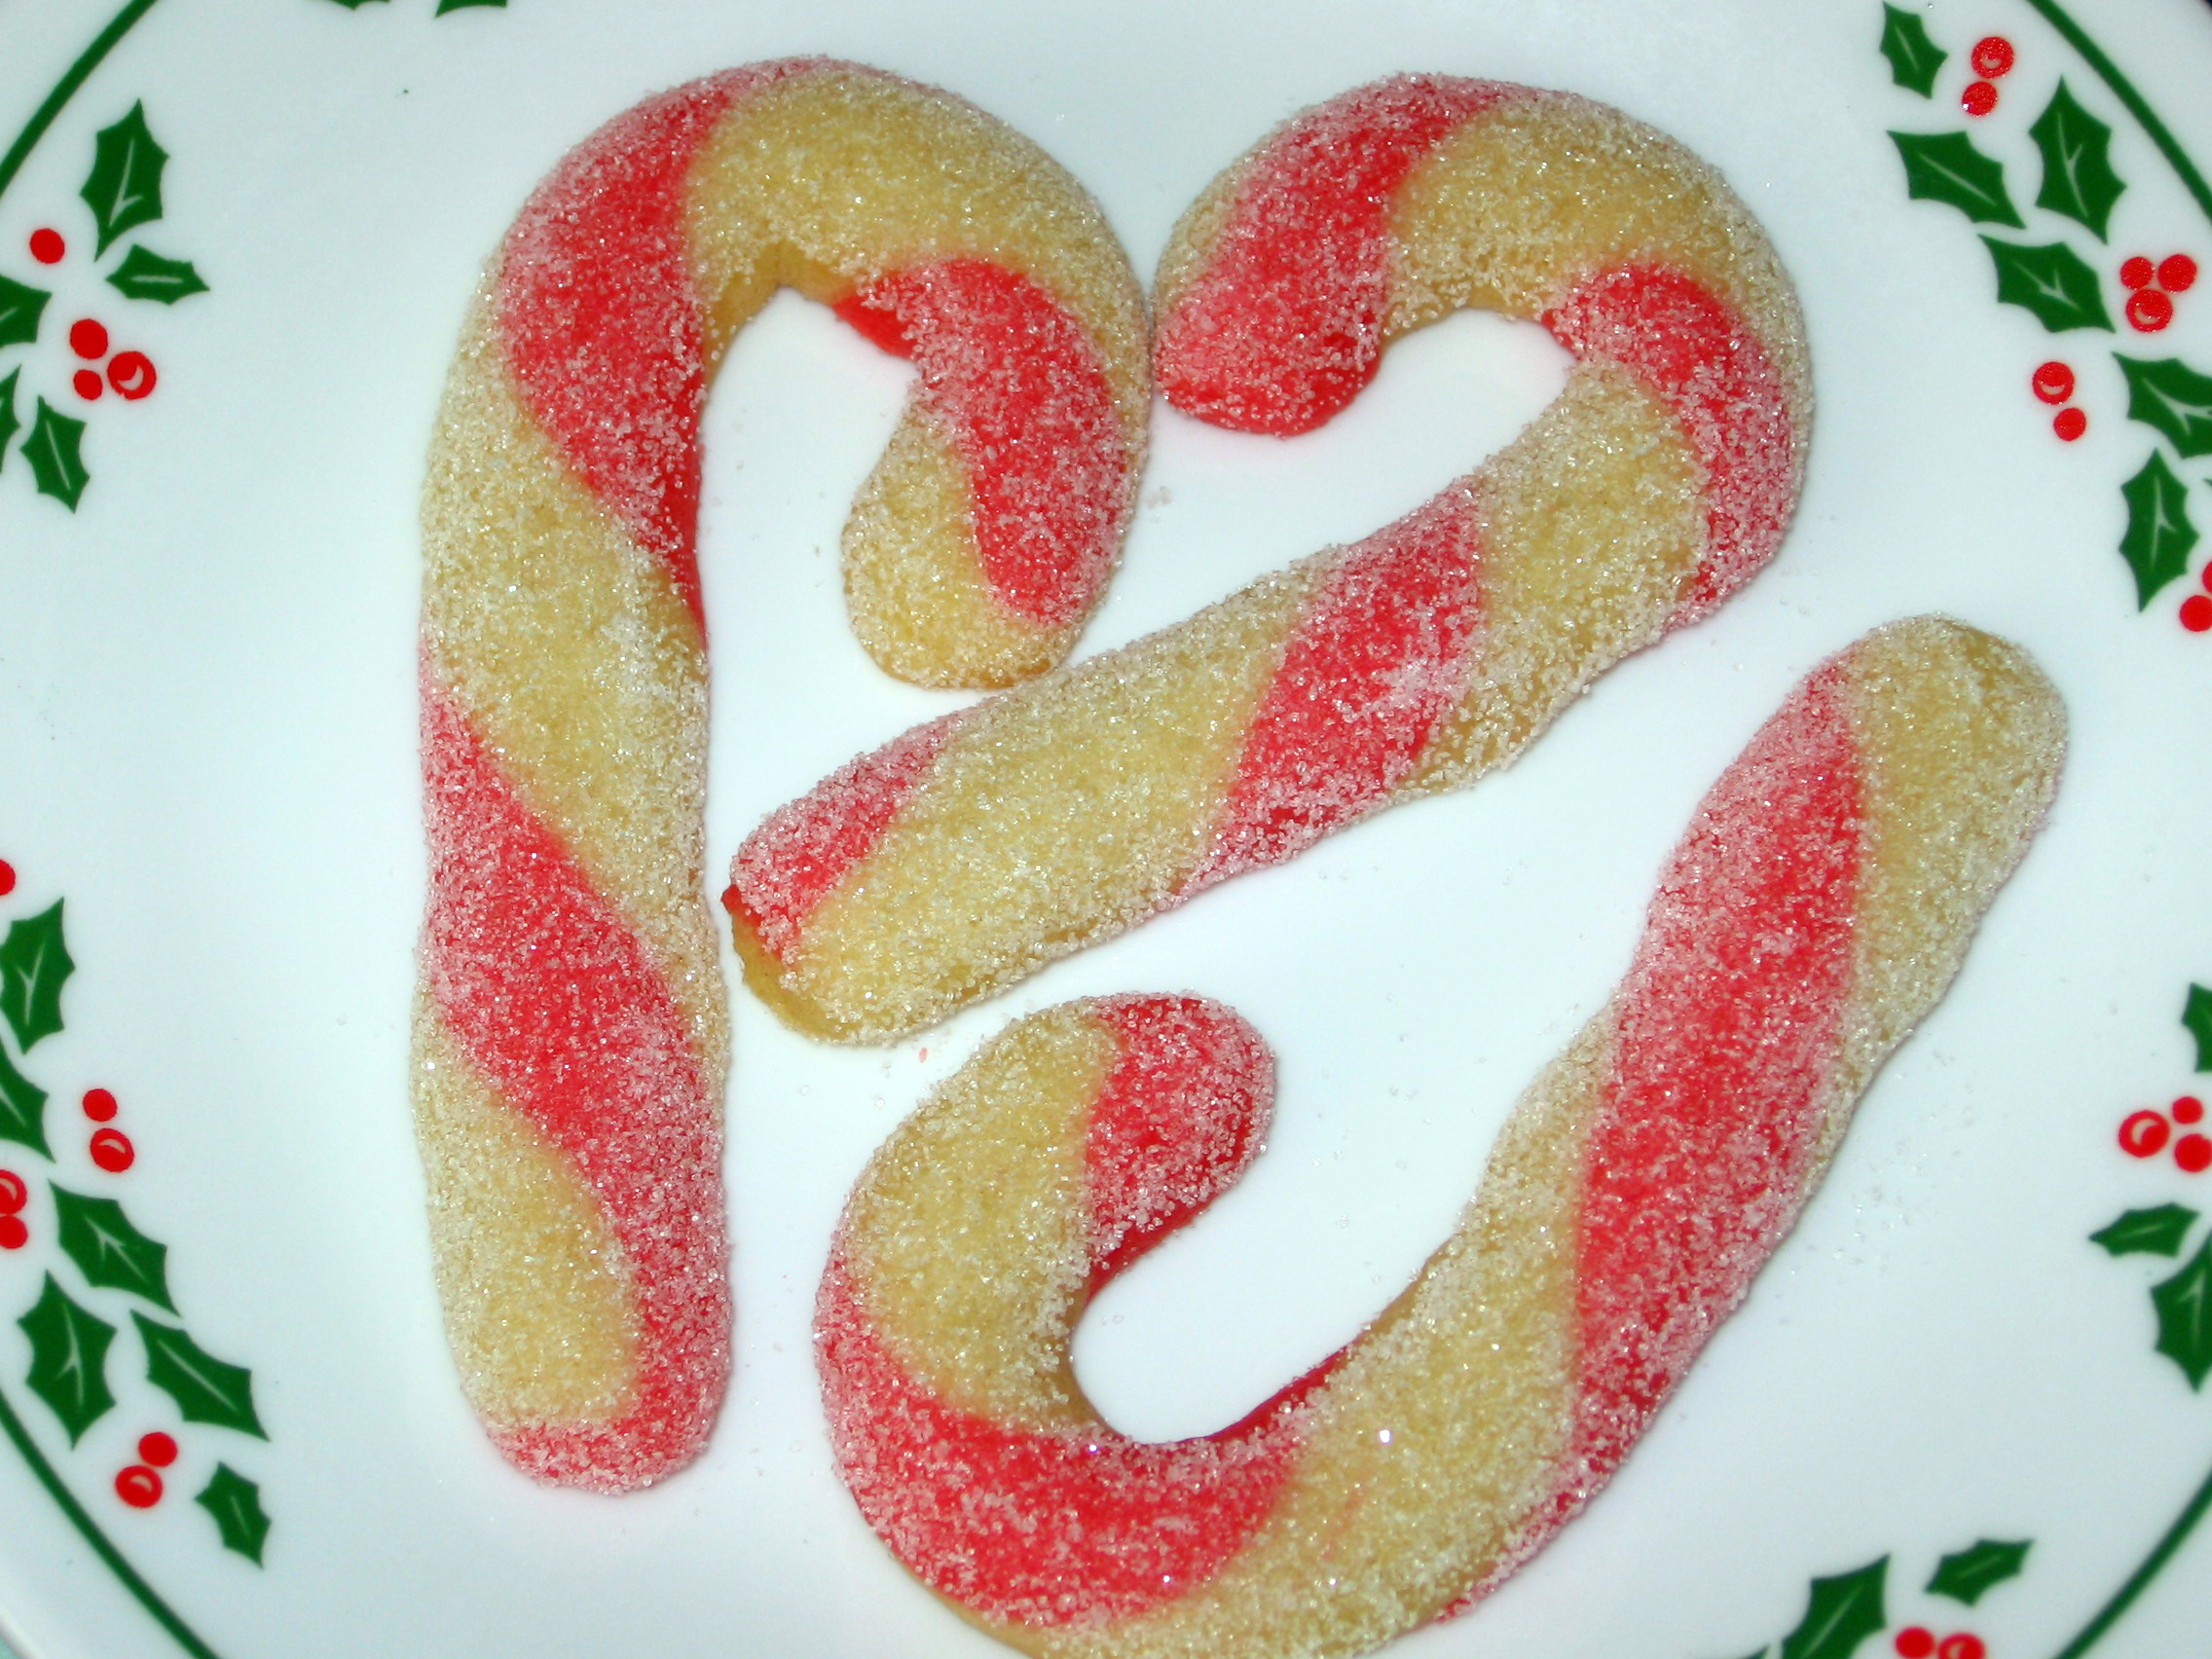 20 Stand Up Christmas Candy Canes Edible Wafer Paper Cake Toppers Decorations 